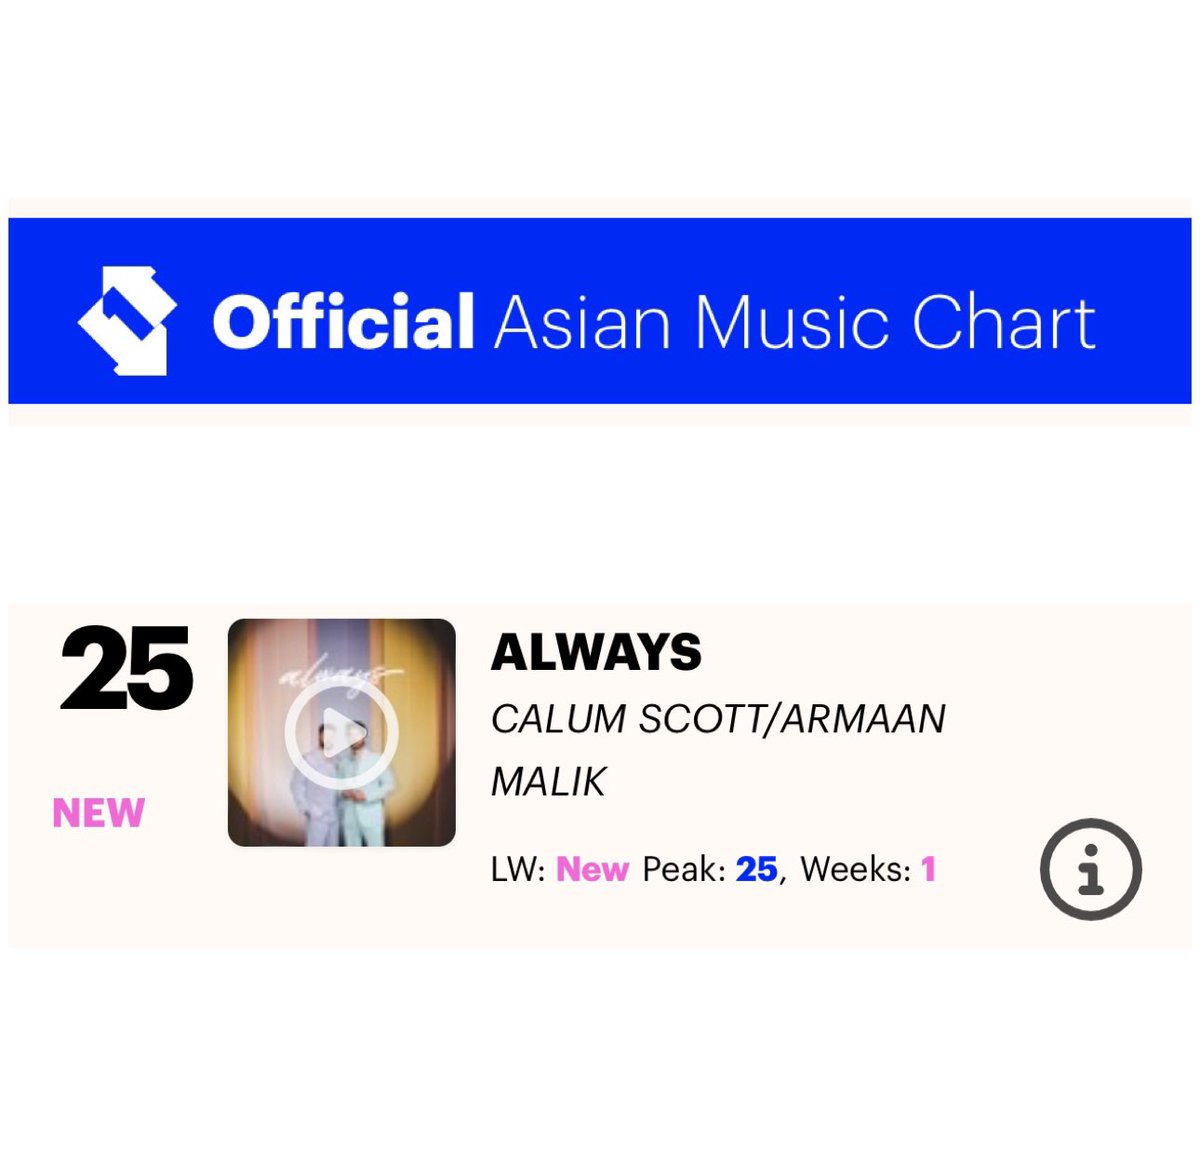 And within a week of release we're already on the Official Asian Music Charts in the UK! Debuting at No.25 💙 Keep streaming and loving our song ‘Always’ and let’s take it to the top x @CalumScott @WarnerMusicIN @BBCAsianNetwork @OfficialCharts